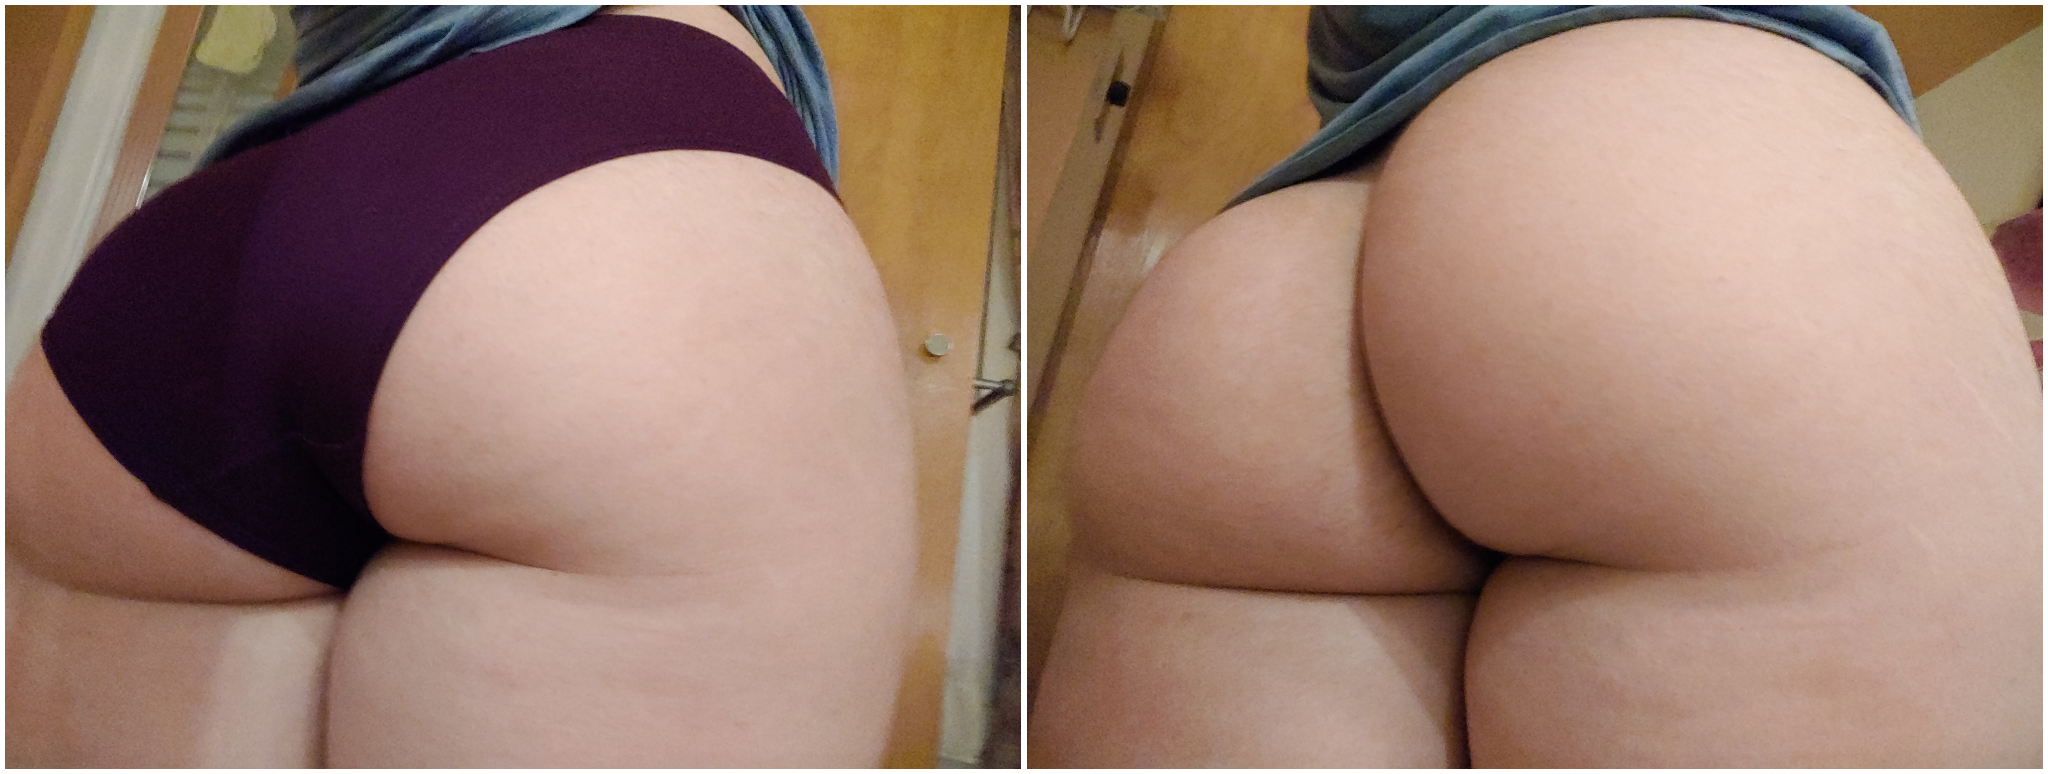 I'm too new to reddit so it won't let me post on r/onof(f20), instead you'll be the lucky ones to see my cute butt 